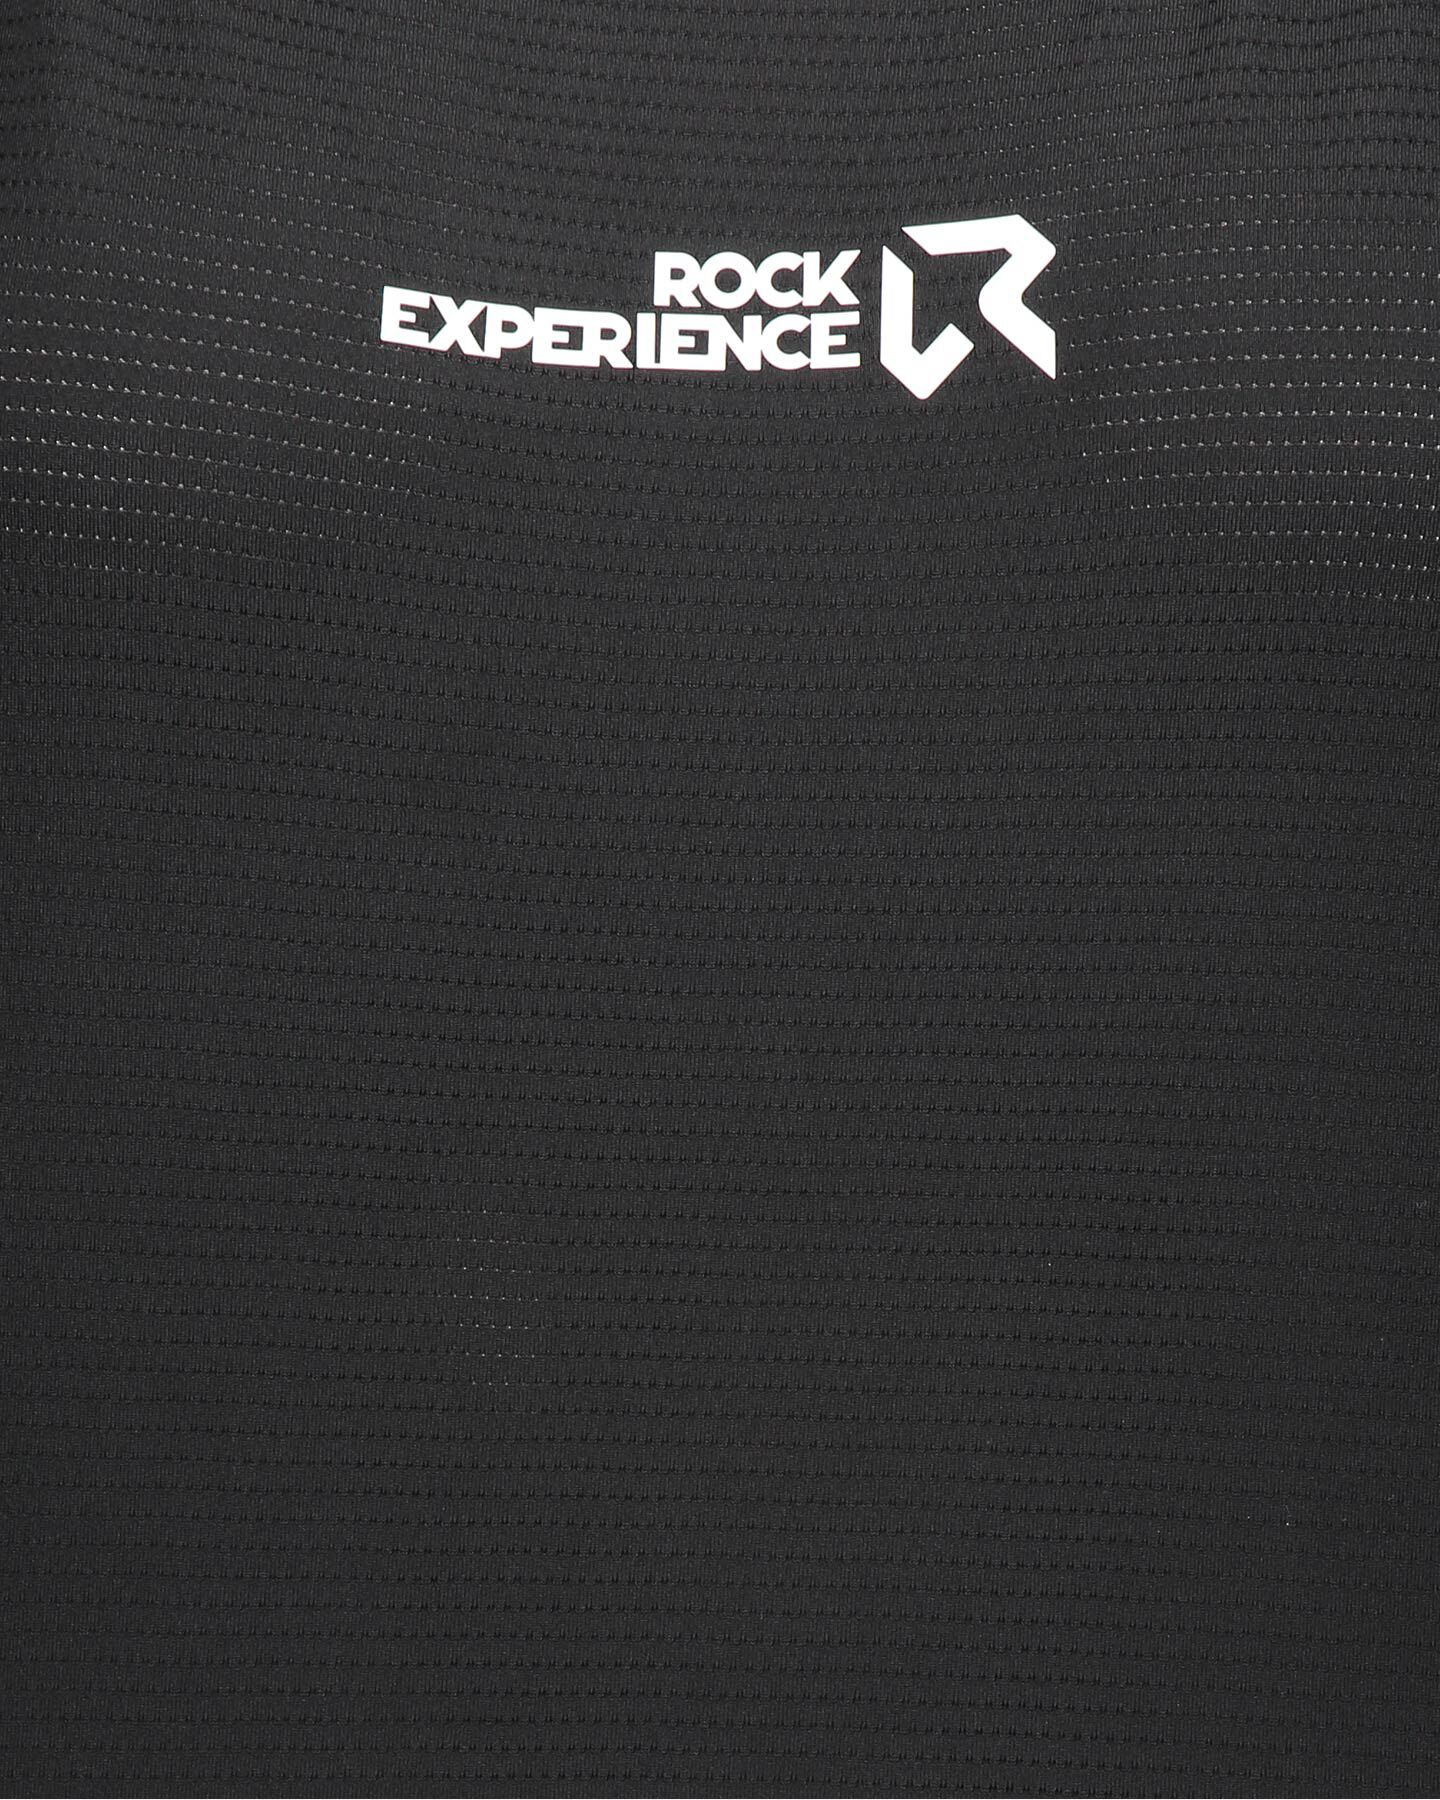  T-Shirt ROCK EXPERIENCE SPIRIT W S4089989|1|S scatto 2